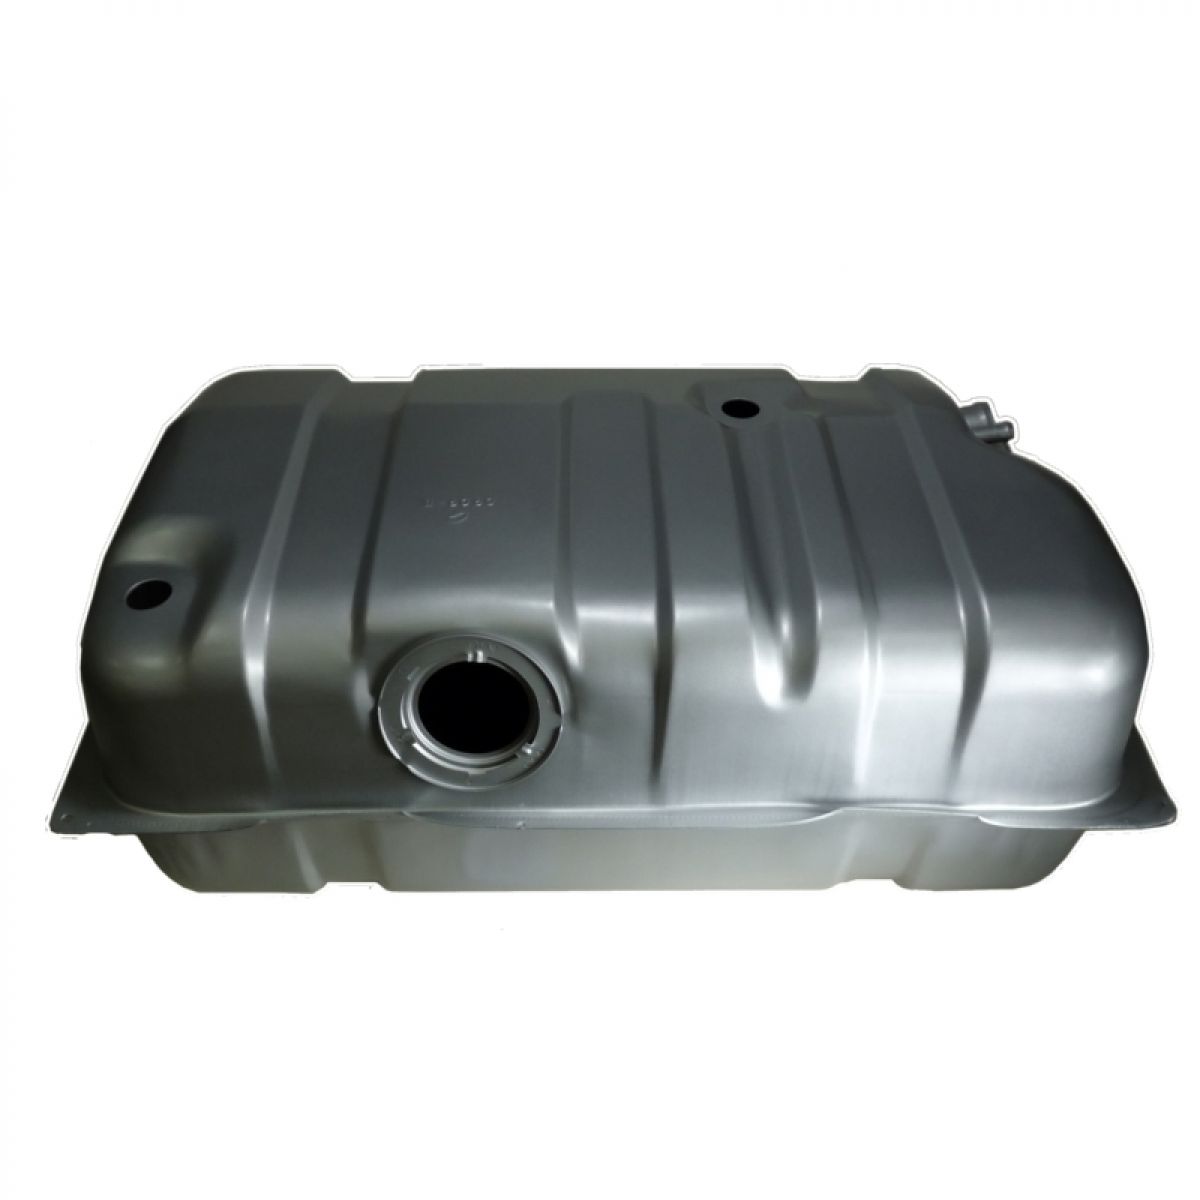 Jeep fuel injection tank